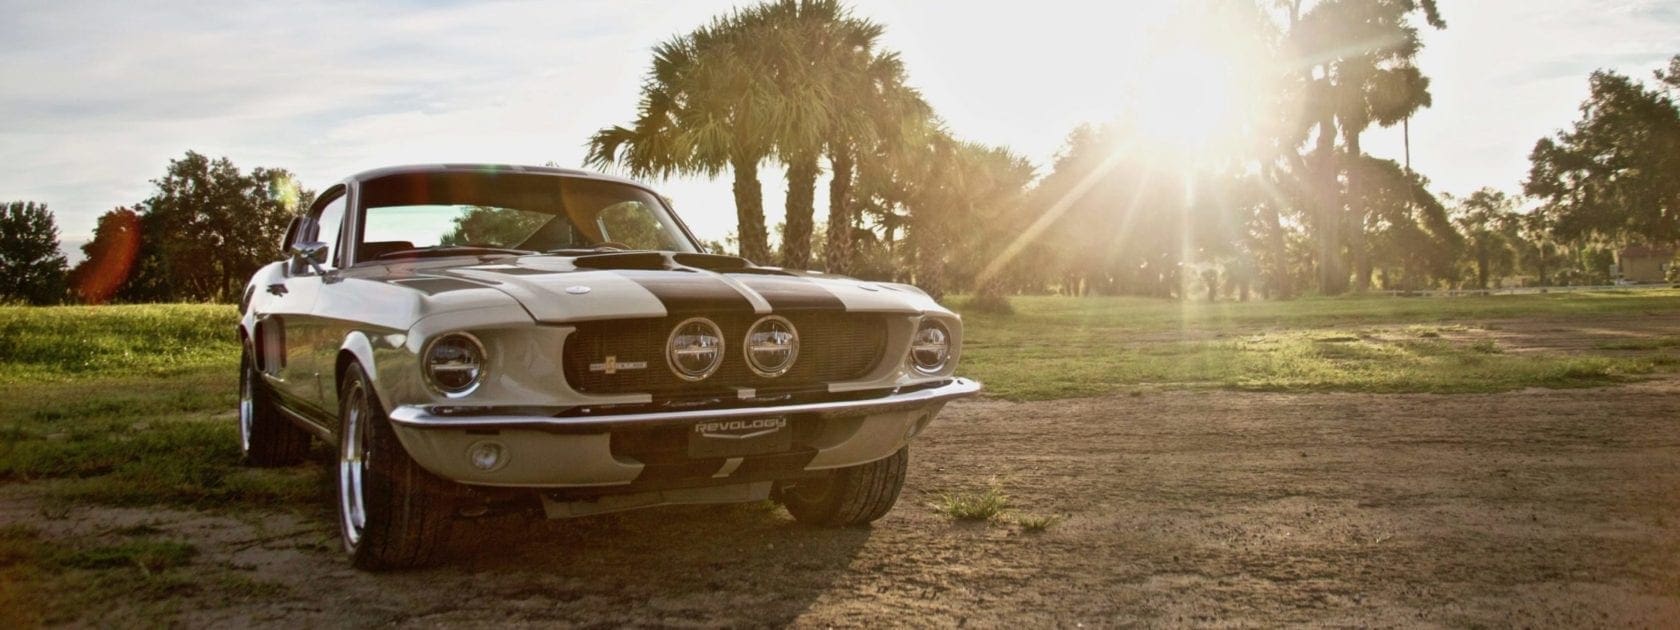 'New' 1964 1/2 Ford Mustangs revved up and ready for sale